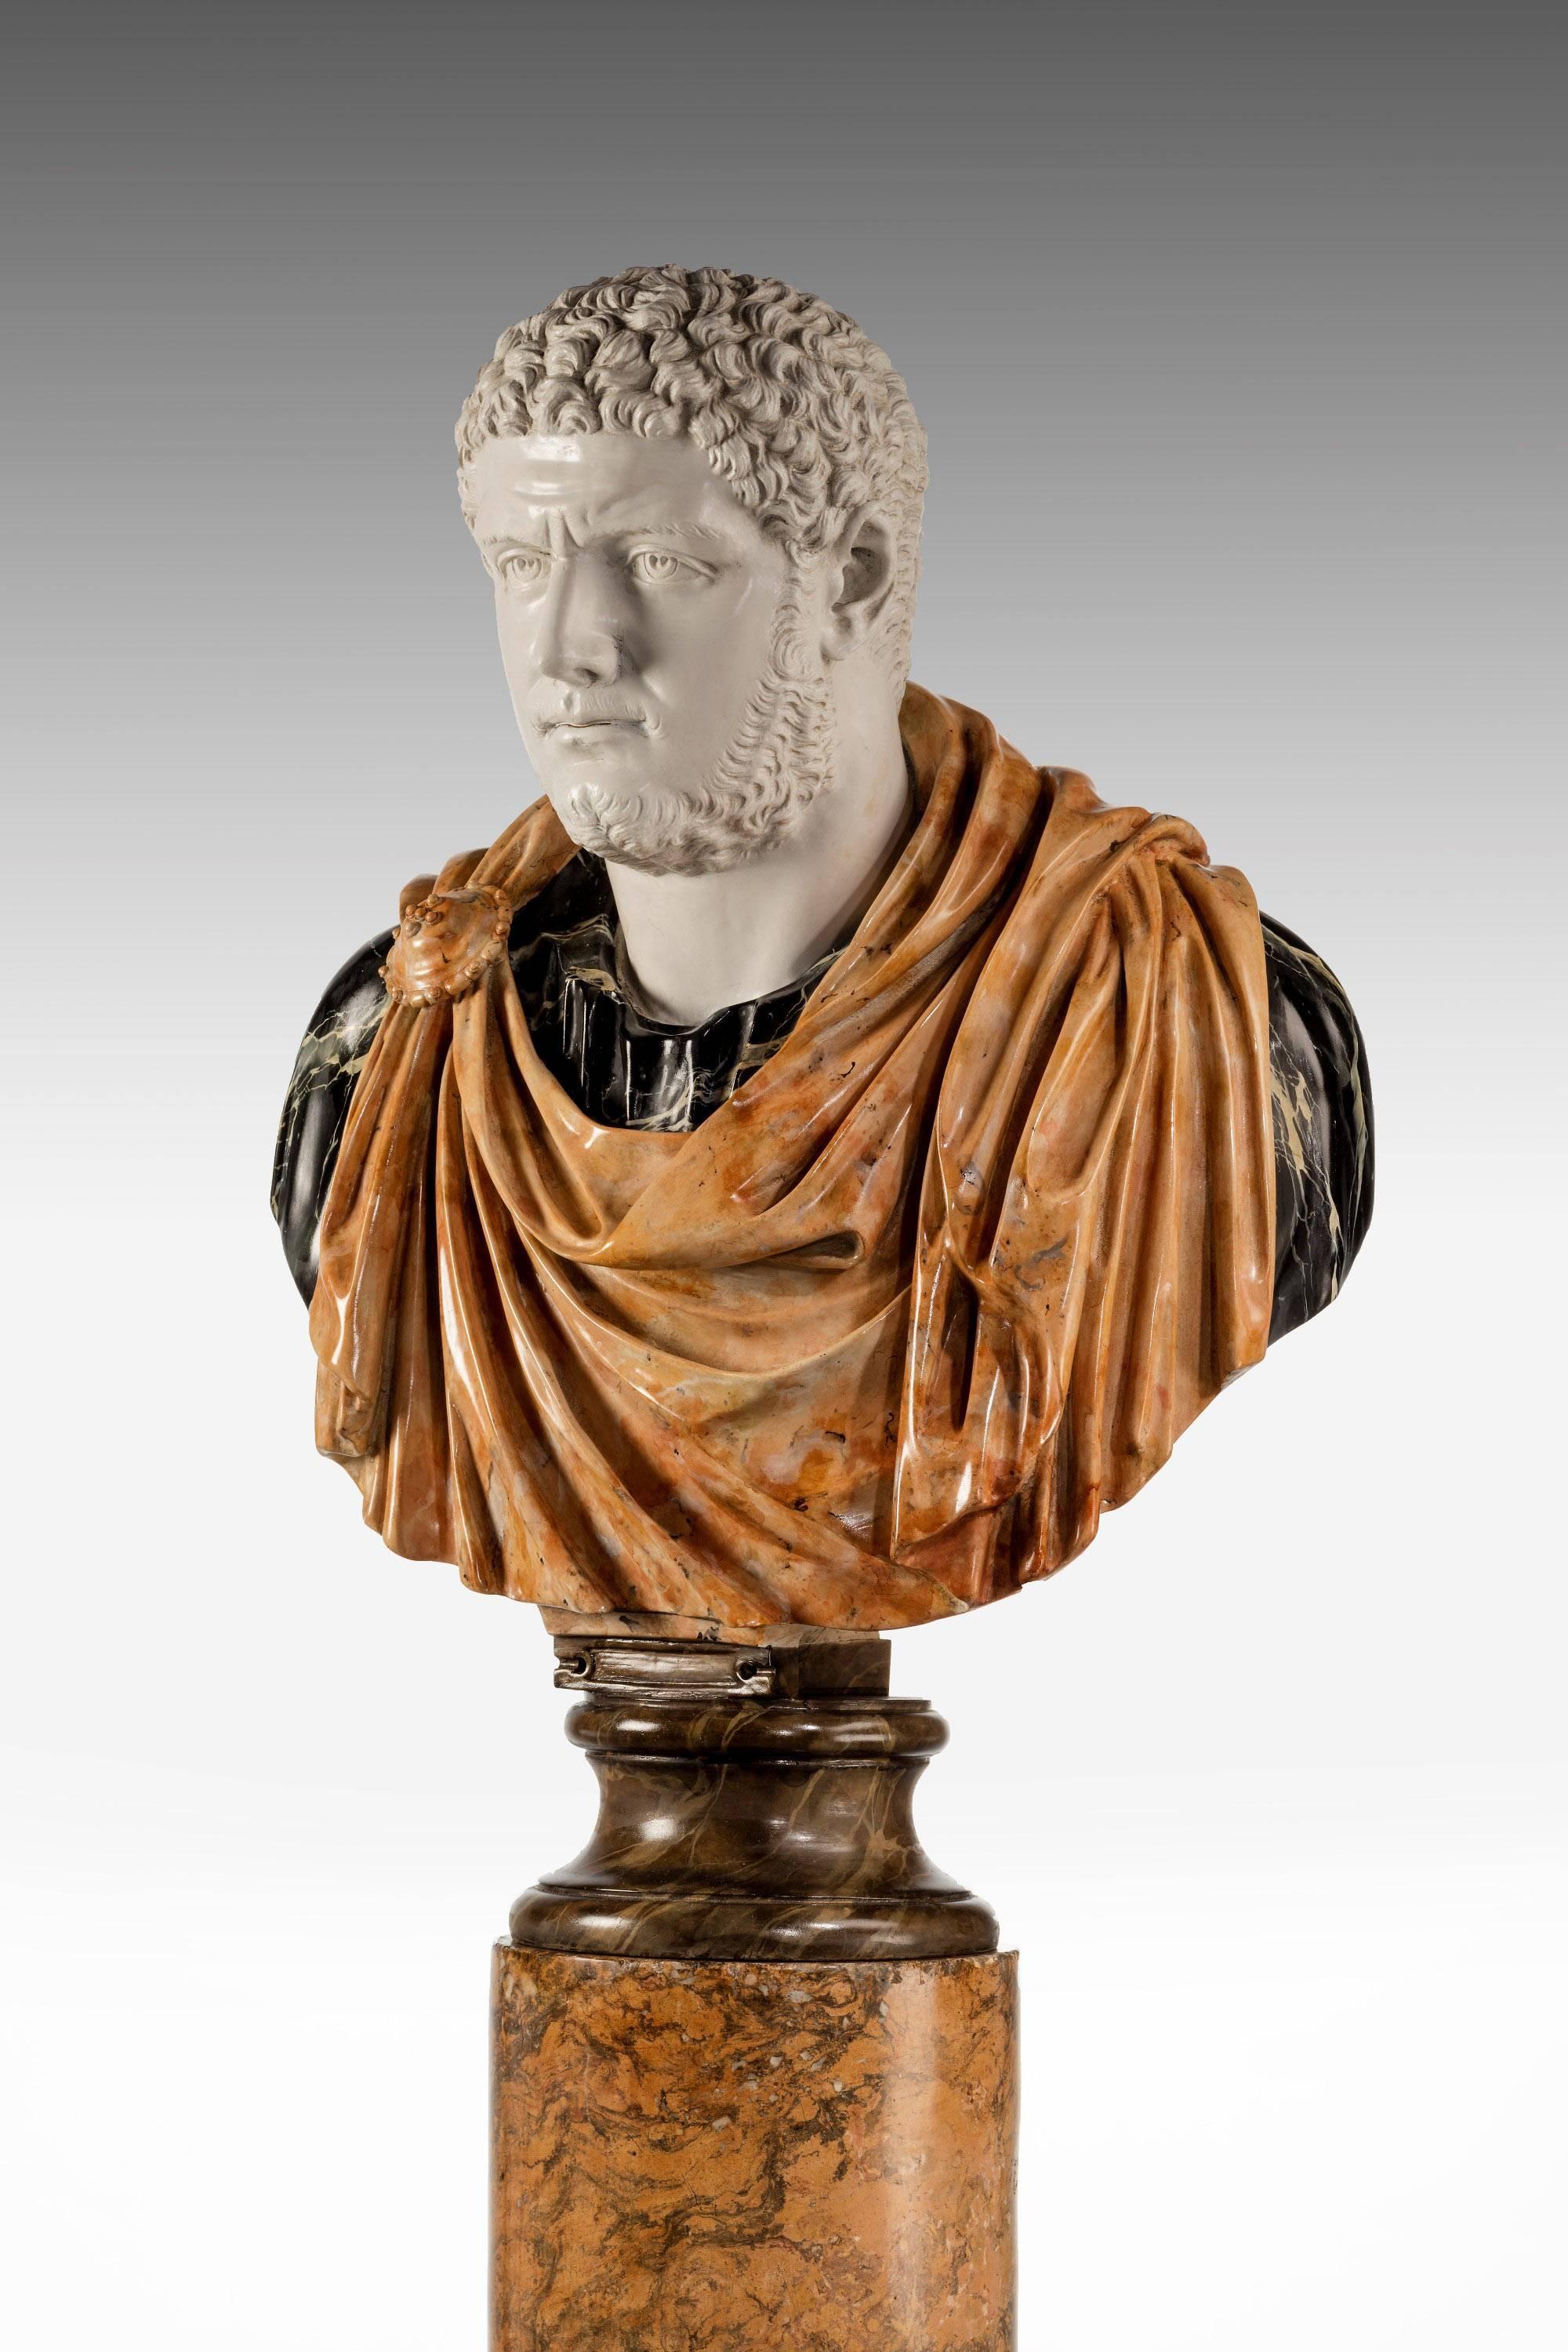 A copy of a Roman Emperor Caracalla (188-217 AD).

Sold without Pedestal.

Caracalla was the popular nickname of Antoninus (4 April 188 – 8 April 217), who was Roman emperor from 198 to 217. The eldest son of Septimius Severus, Caracalla reigned